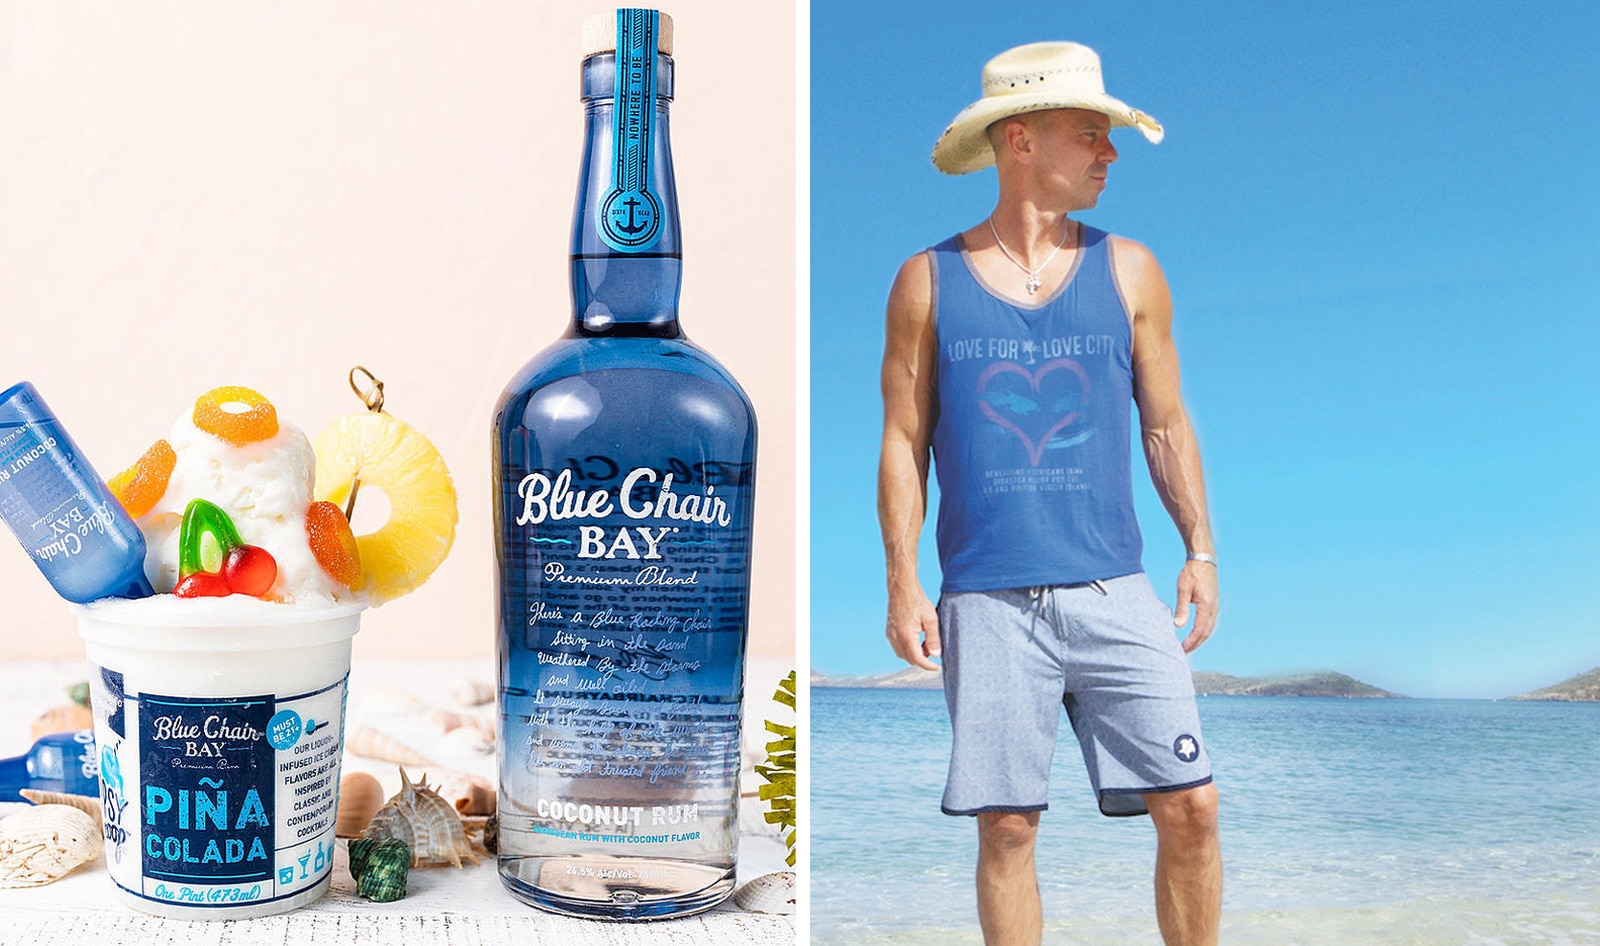 Country Star Kenny Chesney Partners With New York Brand to Create Rum-infused Vegan Piña Colada Ice Cream